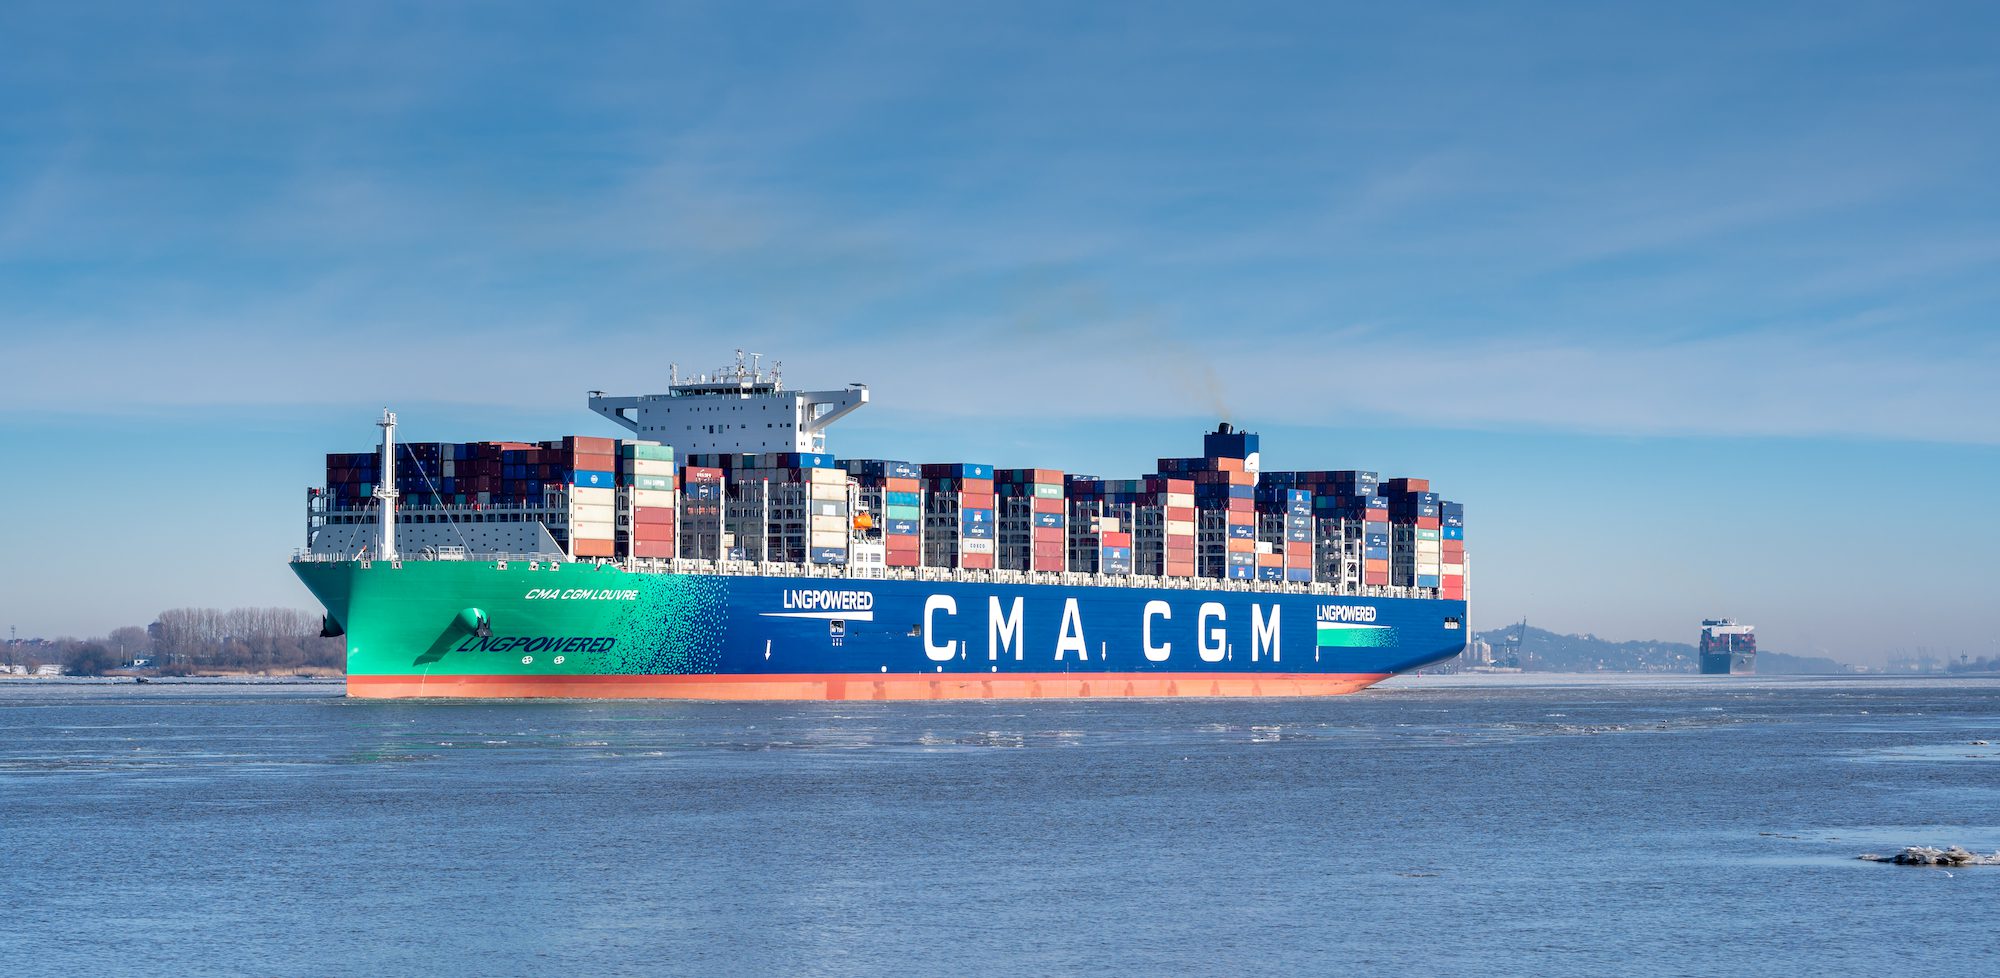 CMA CGM Sets Course to Overtake Maersk in Shipping Line Rankings